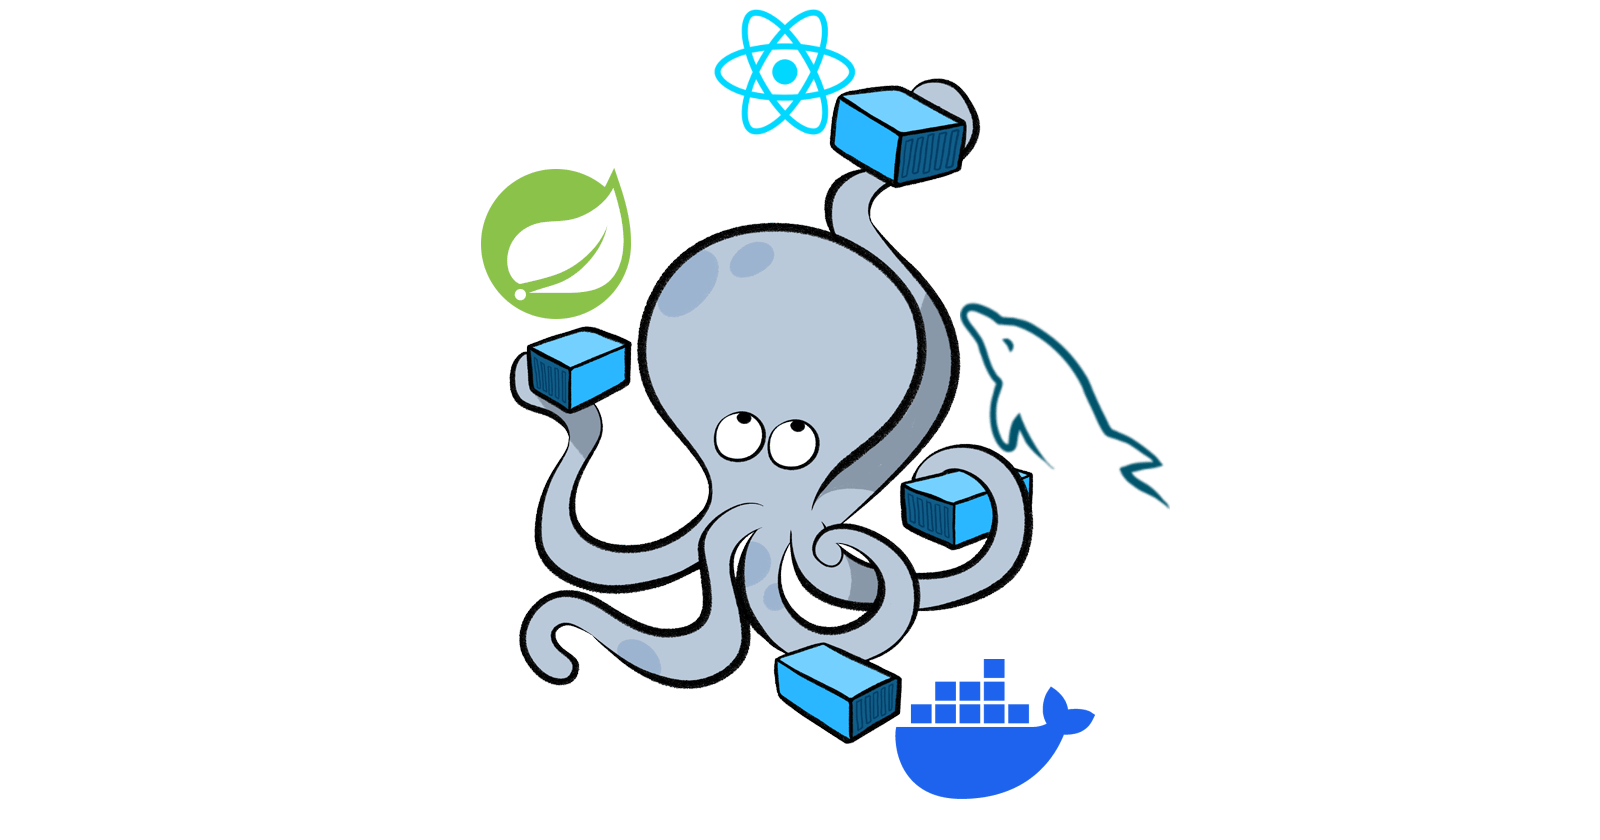 Dockerizing a Fullstack Application crafted in MySQL, Spring Boot & React with Docker Compose